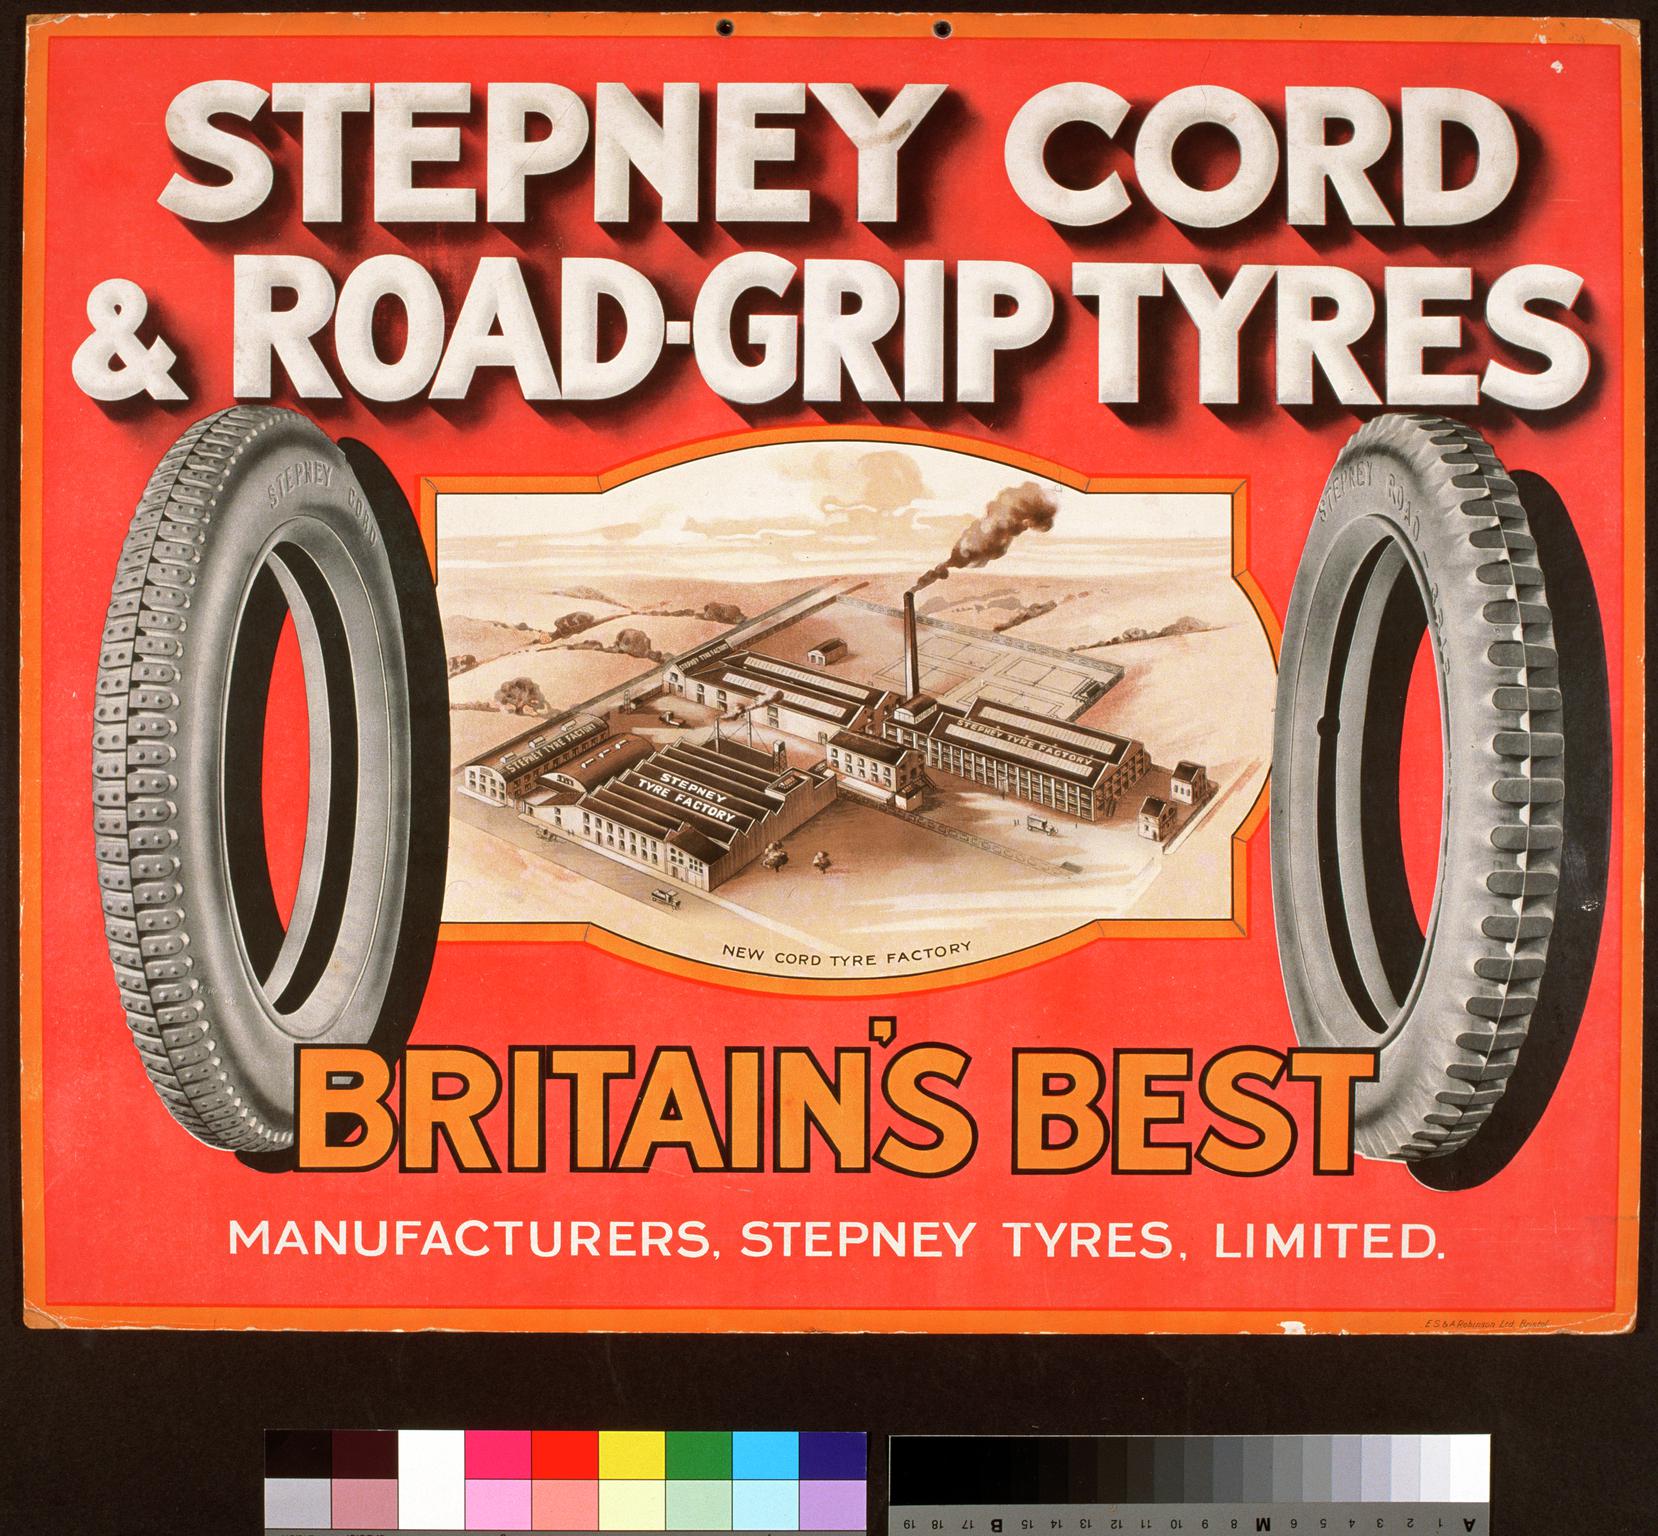 Stepney Cord & Road-Grip Tyres (poster)